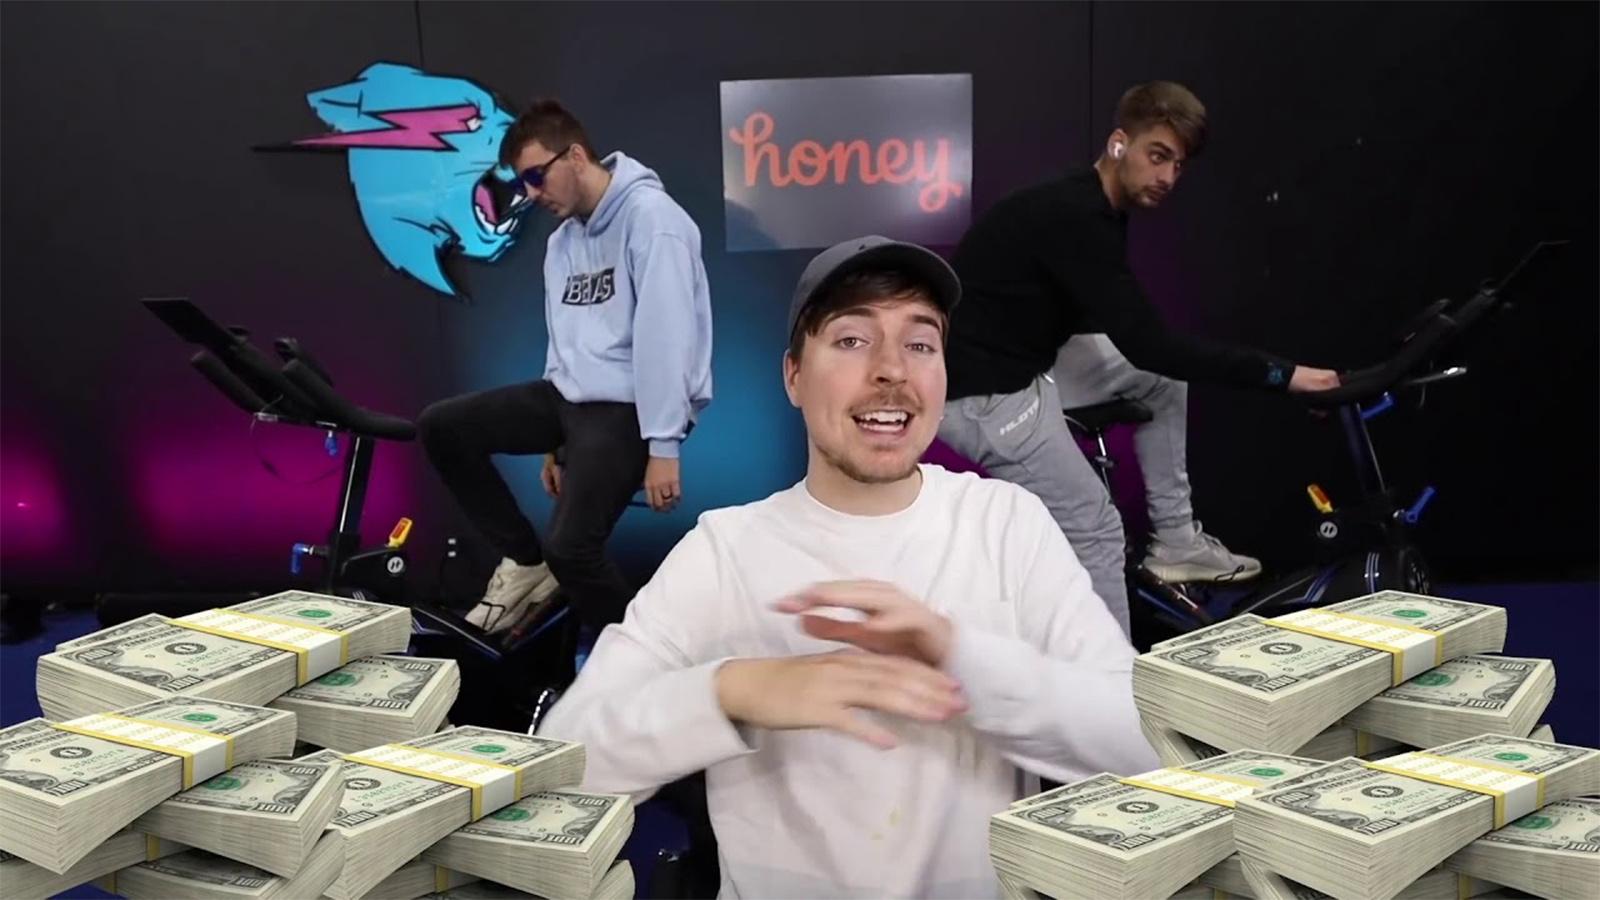 How much does MrBeast make — and how much does he donate?